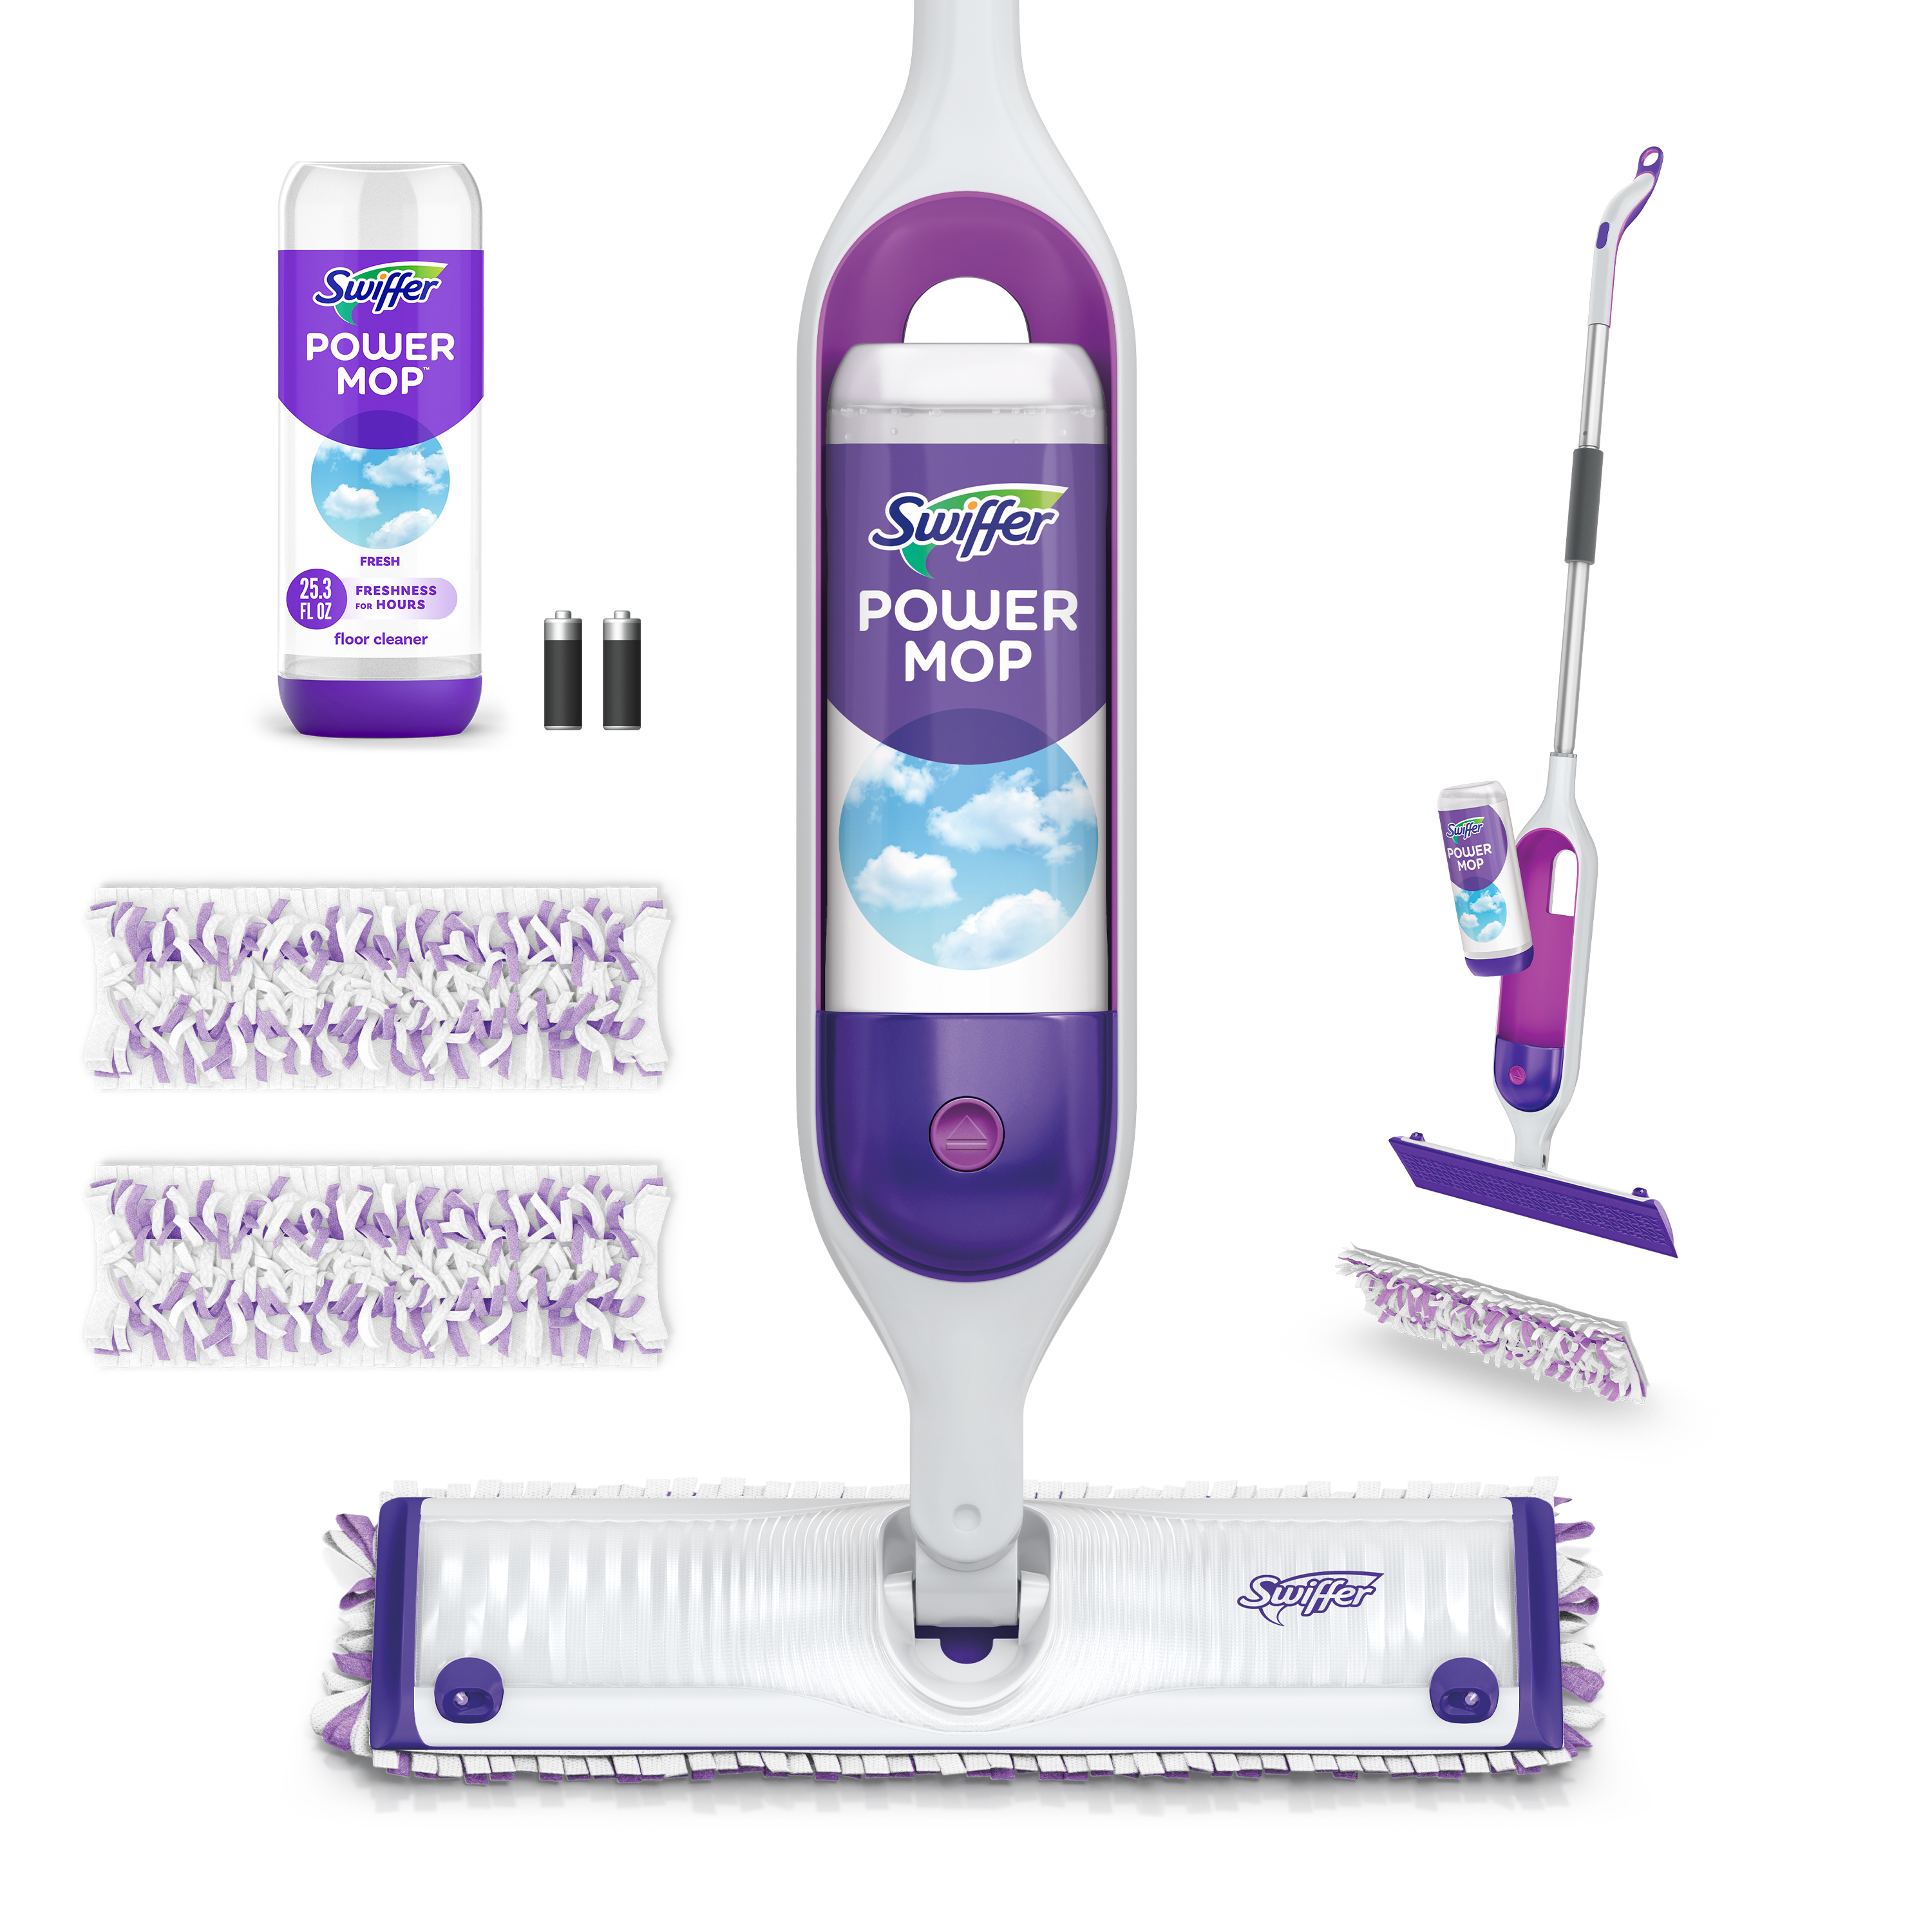 Swiffer PowerMop Multi-Surface Mop Kit for Floor Cleaning, Fresh Scent - image 1 of 11